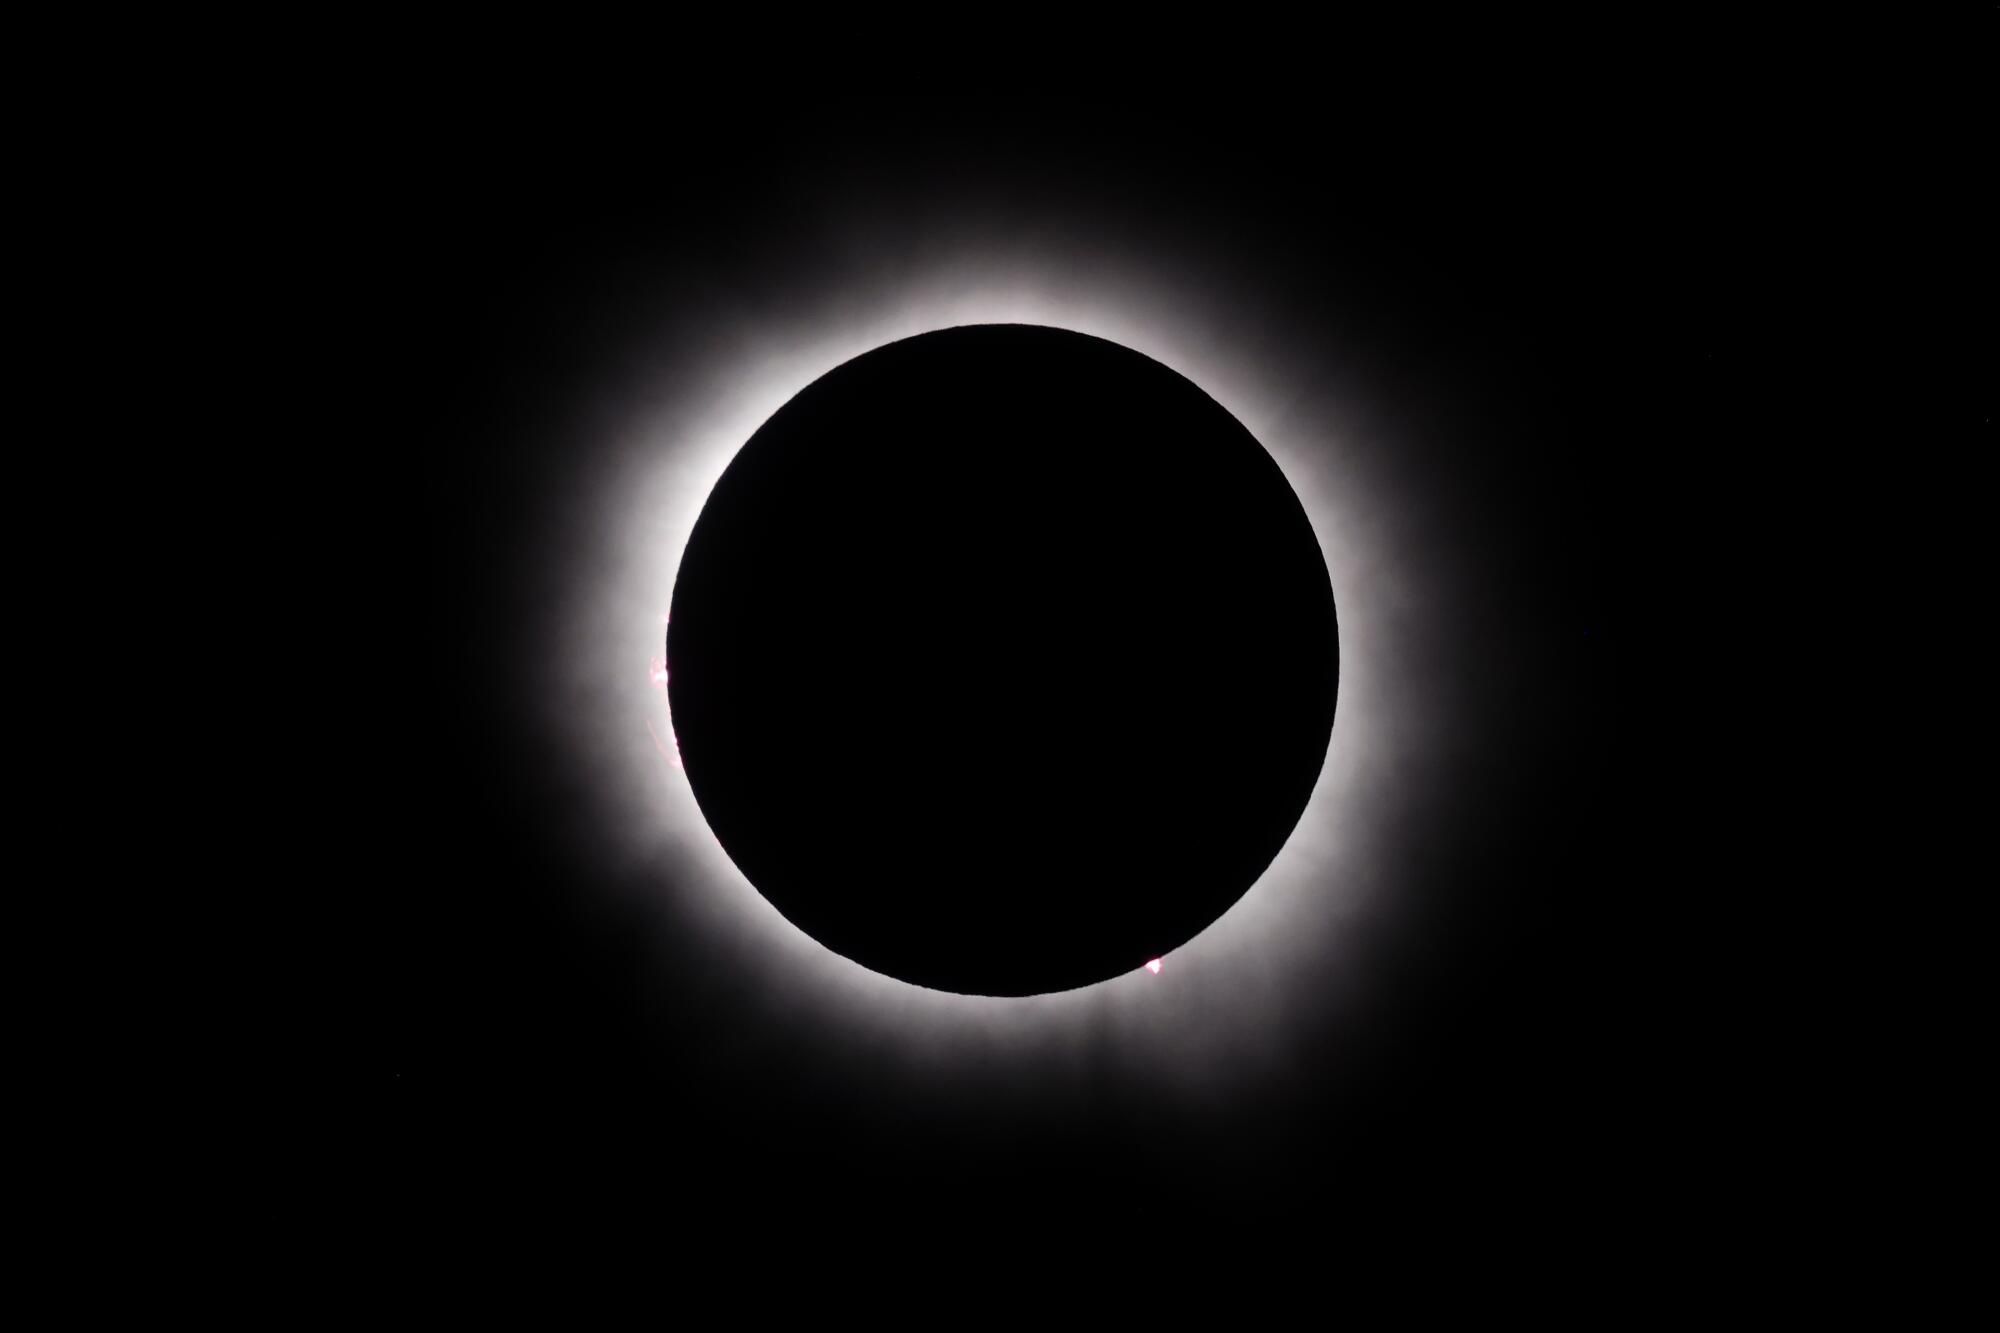 A black circle has white edges against a black background as the moon covers the sun during a total solar eclipse.